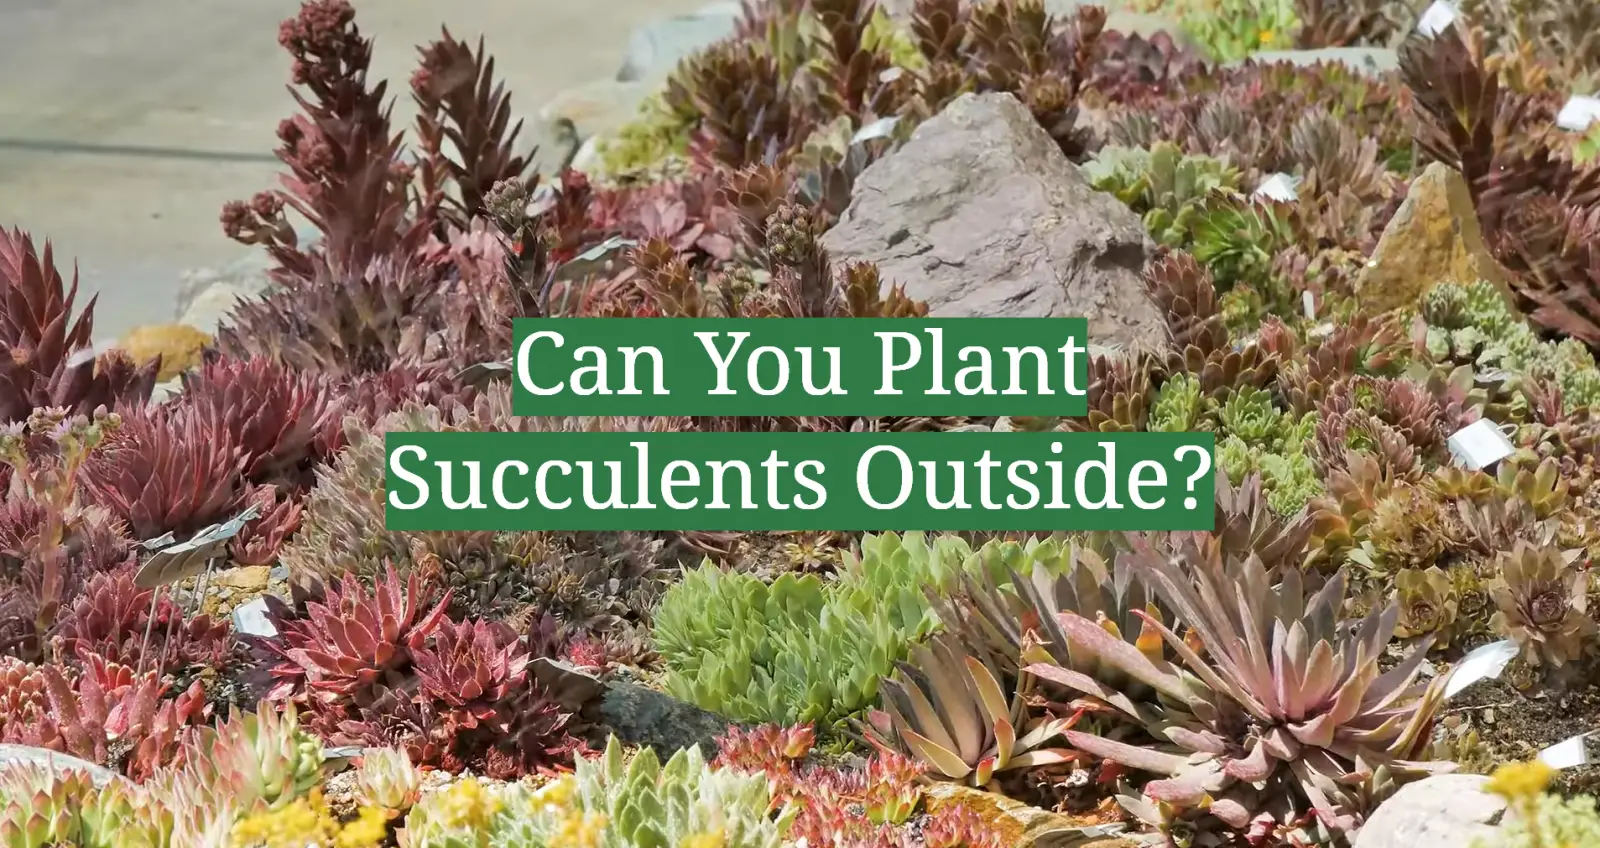 Can You Plant Succulents Outside?